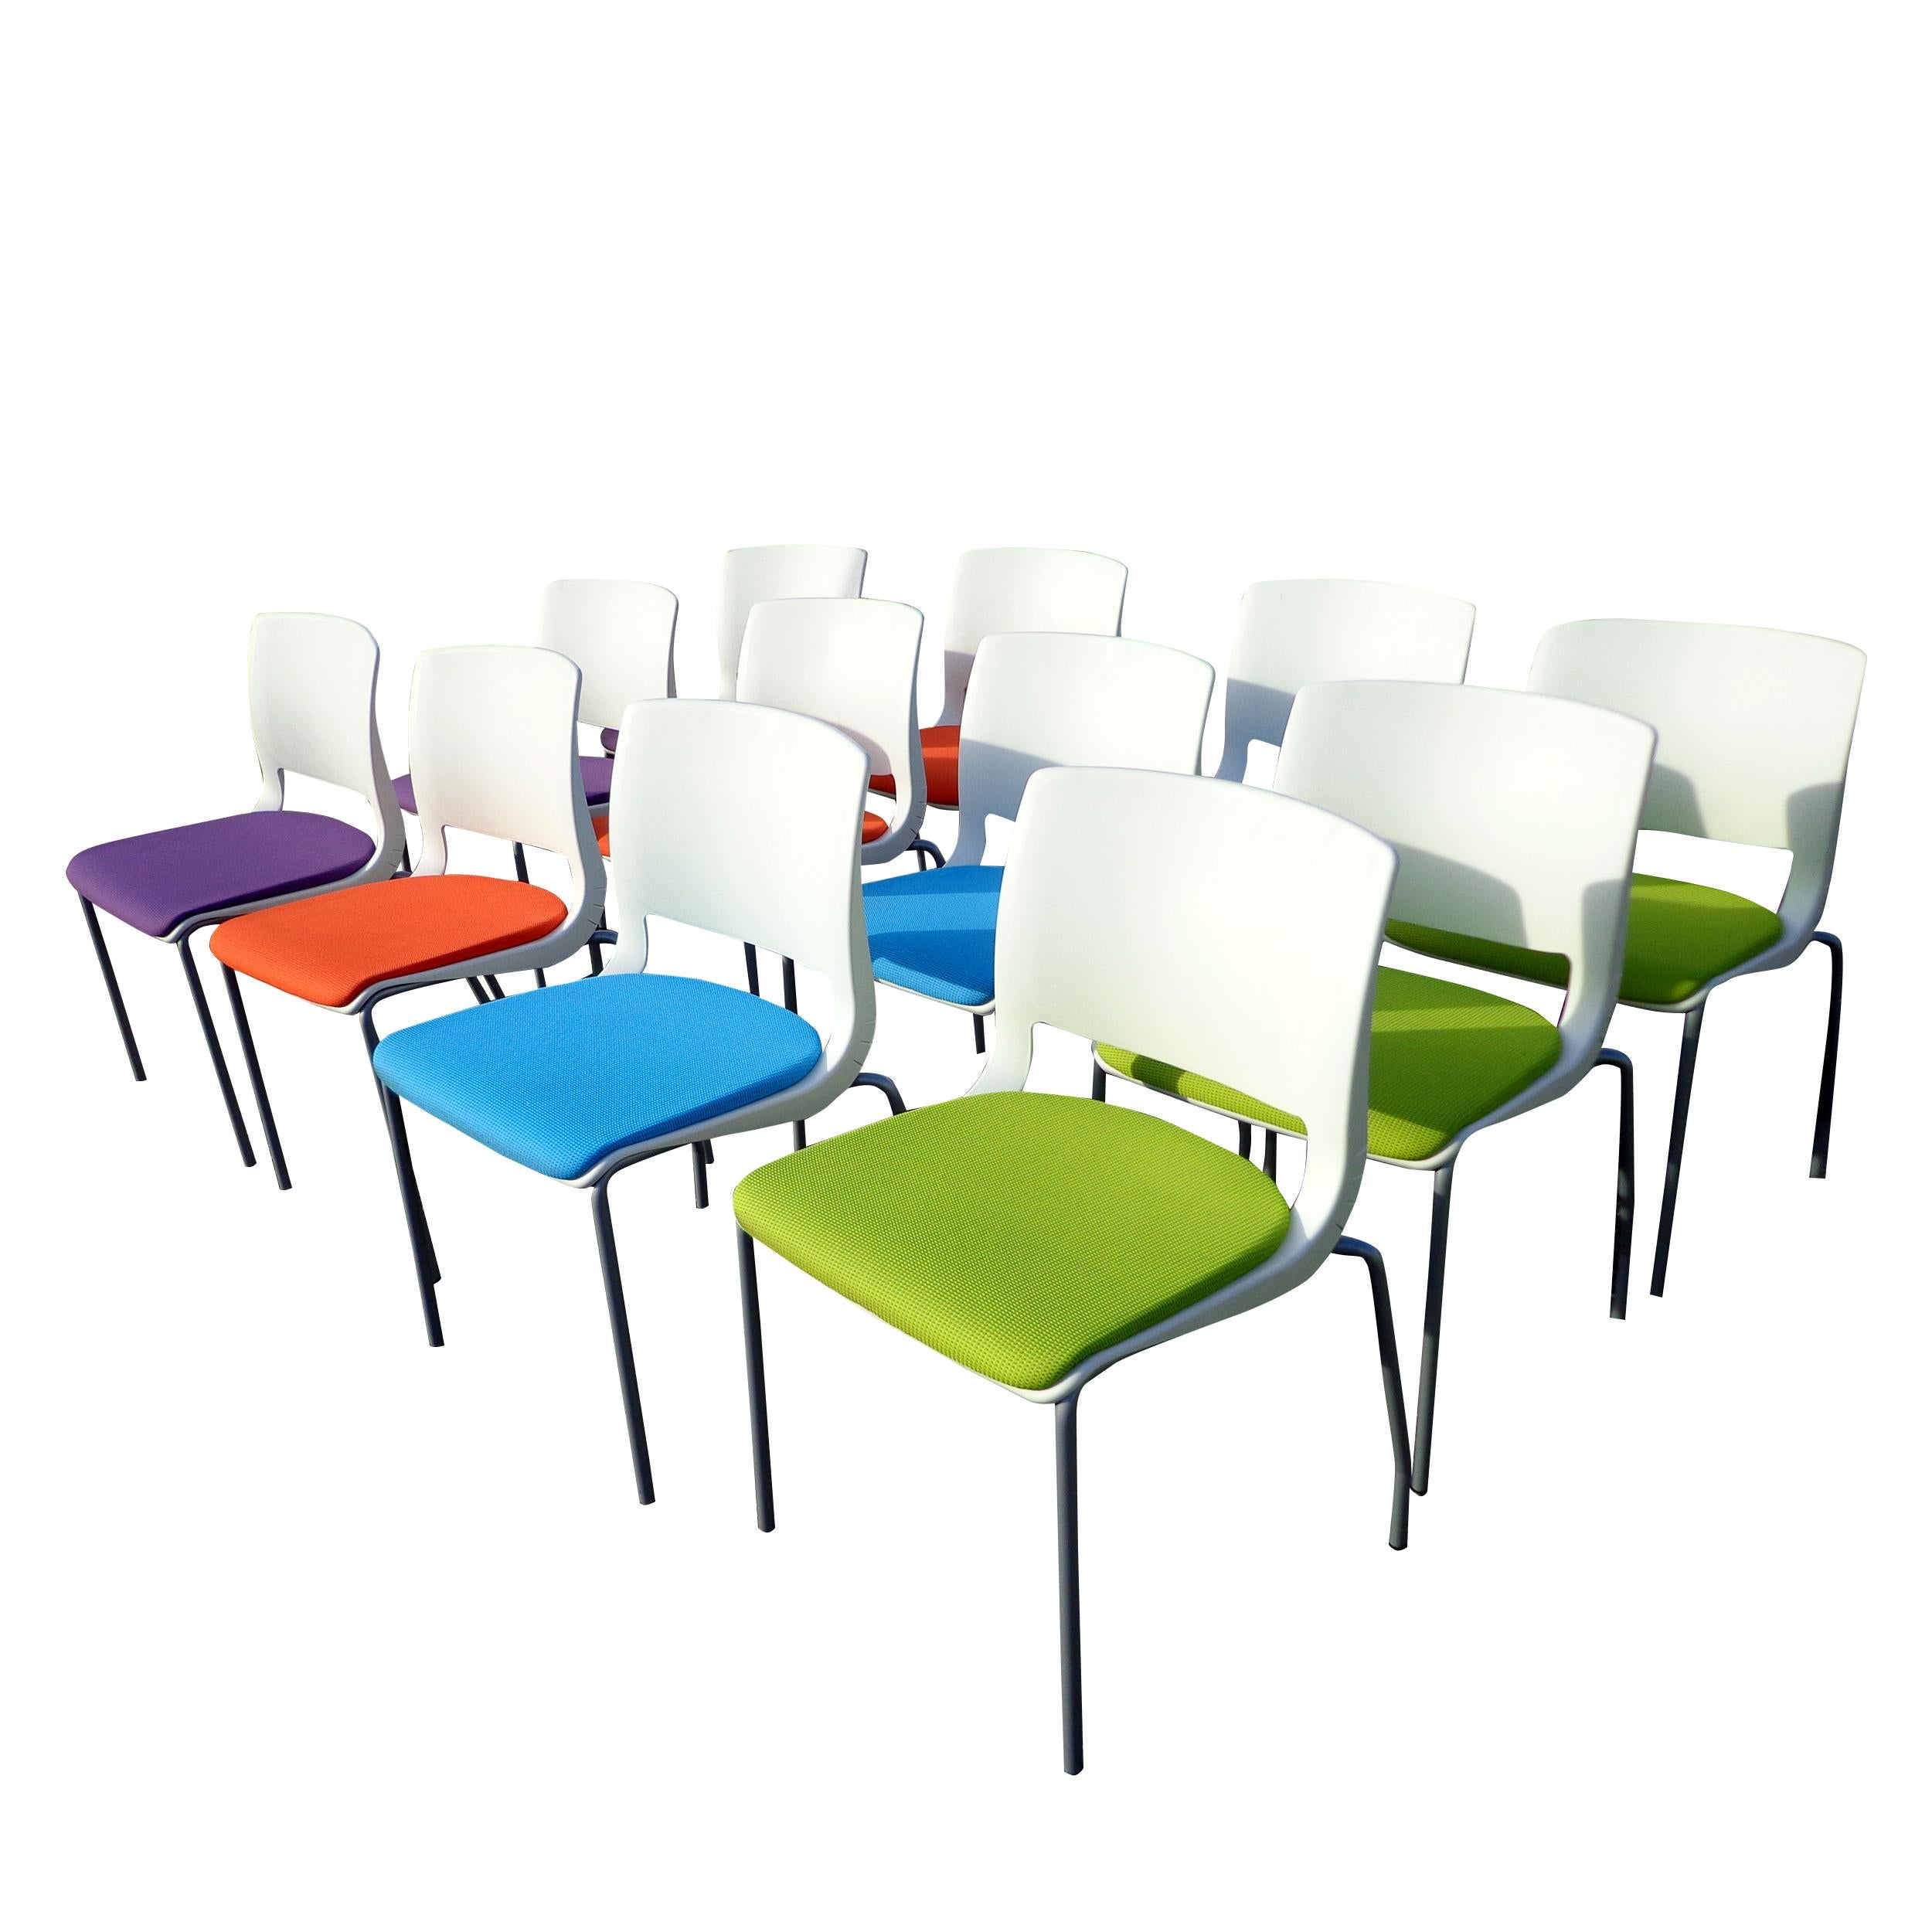 1 Teknion Variable Stacking Chair by by Alessandro Piretti


Designed by Alessandro Piretti, Variable is ideal for informal spaces where reconfiguration is encouraged, yet durability and style
remain essential. 
Variable features a one-piece molded